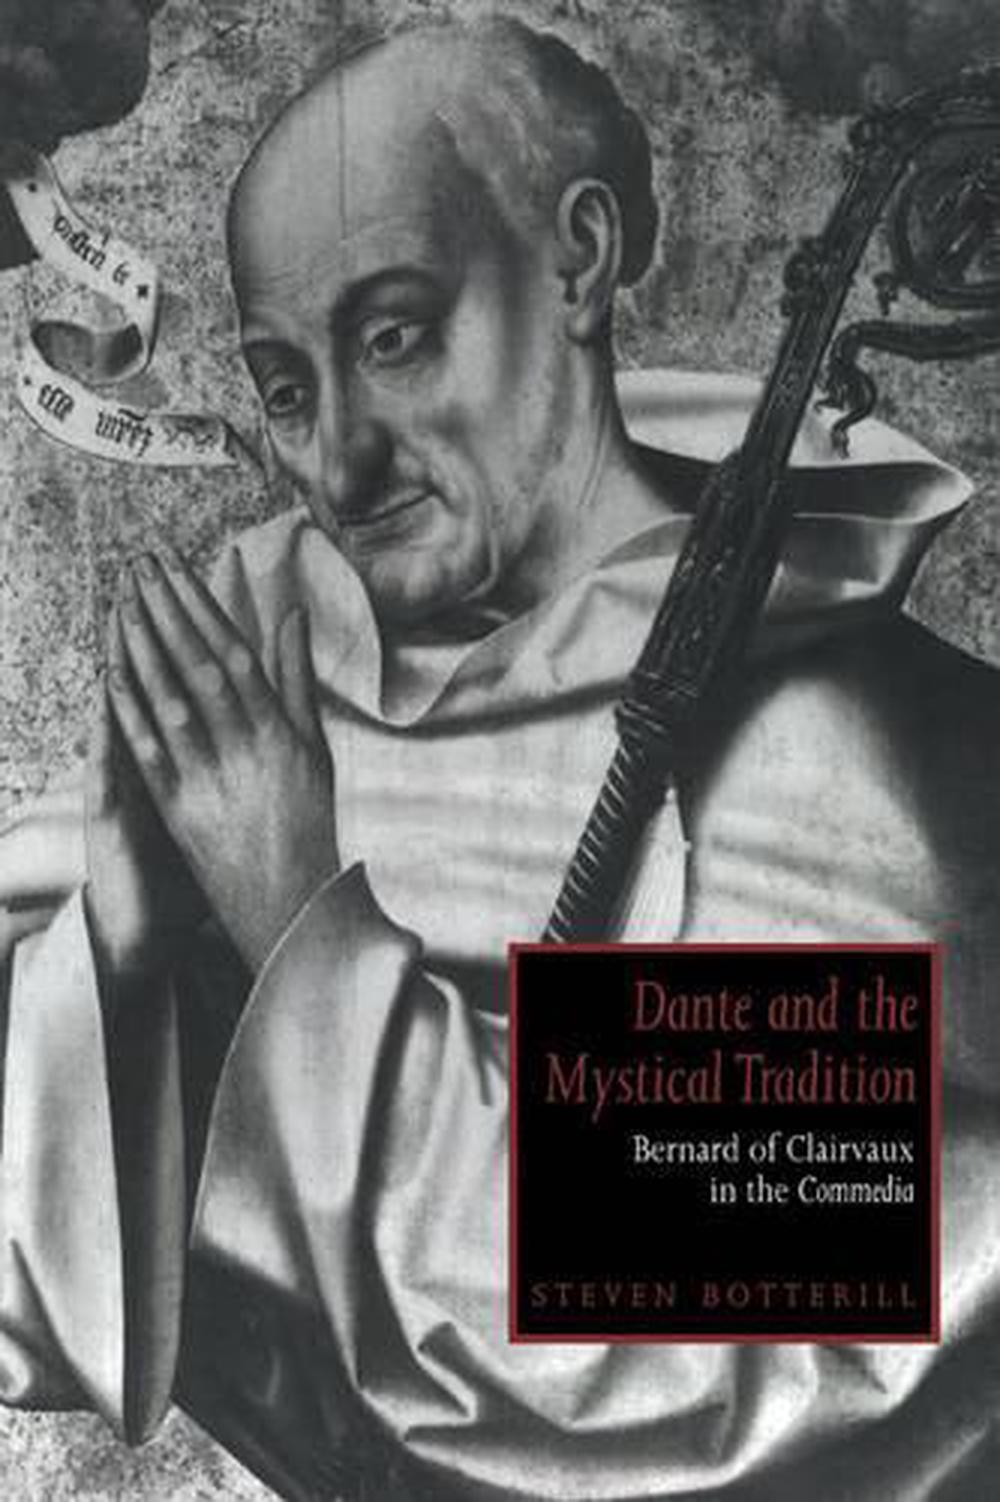 Dante and the Mystical Tradition: Bernard of Clairvaux in the Commedia